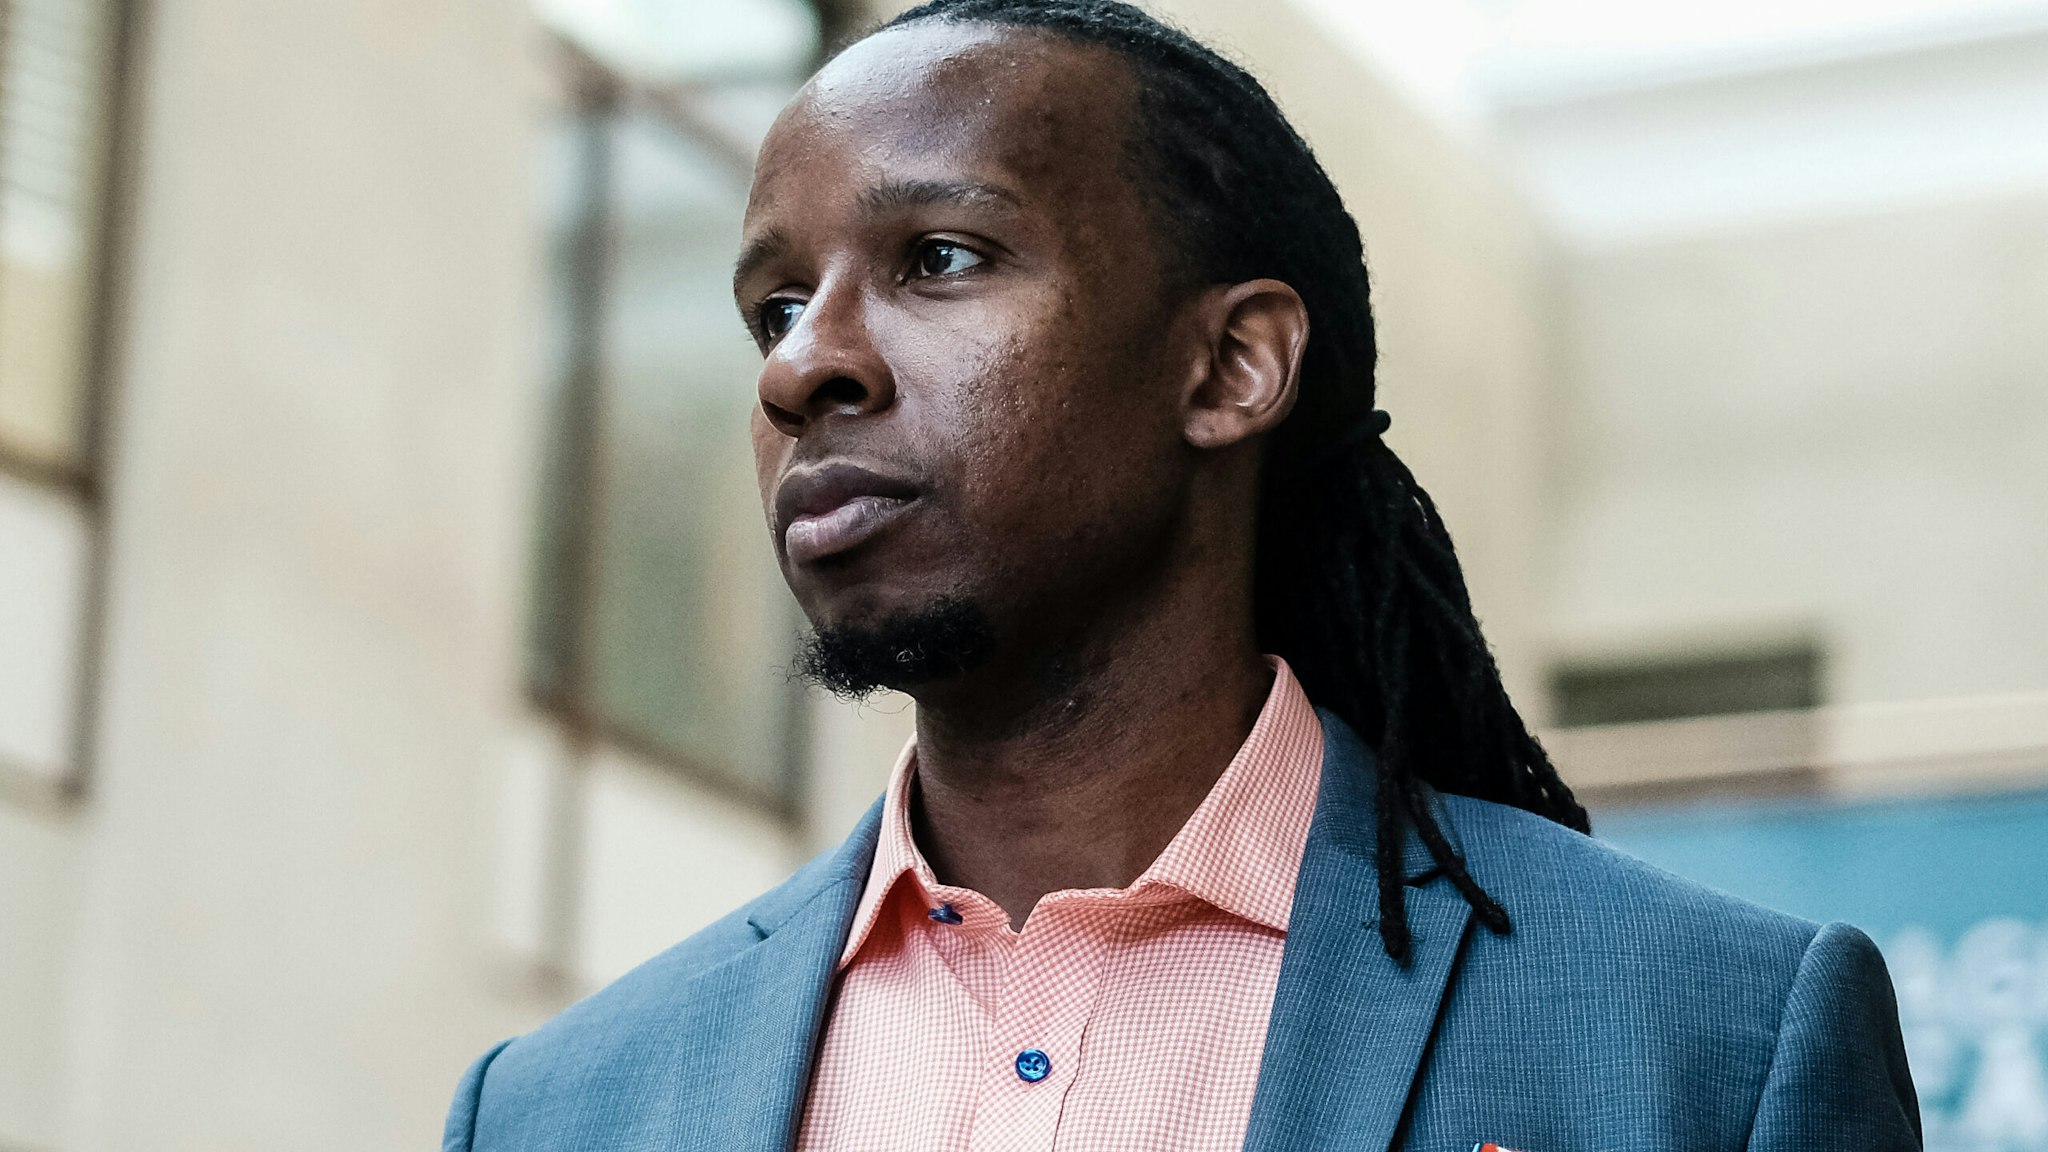 WASHINGTON, US - SEPTEMBER 26: American University professor Dr. Ibram X. Kendi, stands for a portrait at the School of International Service following a panel discussion on his new book How to Be an Antiracist in Washington, DC. Kendis discussion spoke on strategies to identify and overcome racism on September 26, 2019 in Washington, DC. (Michael A. McCoy/For The Washington Post via Getty Images)